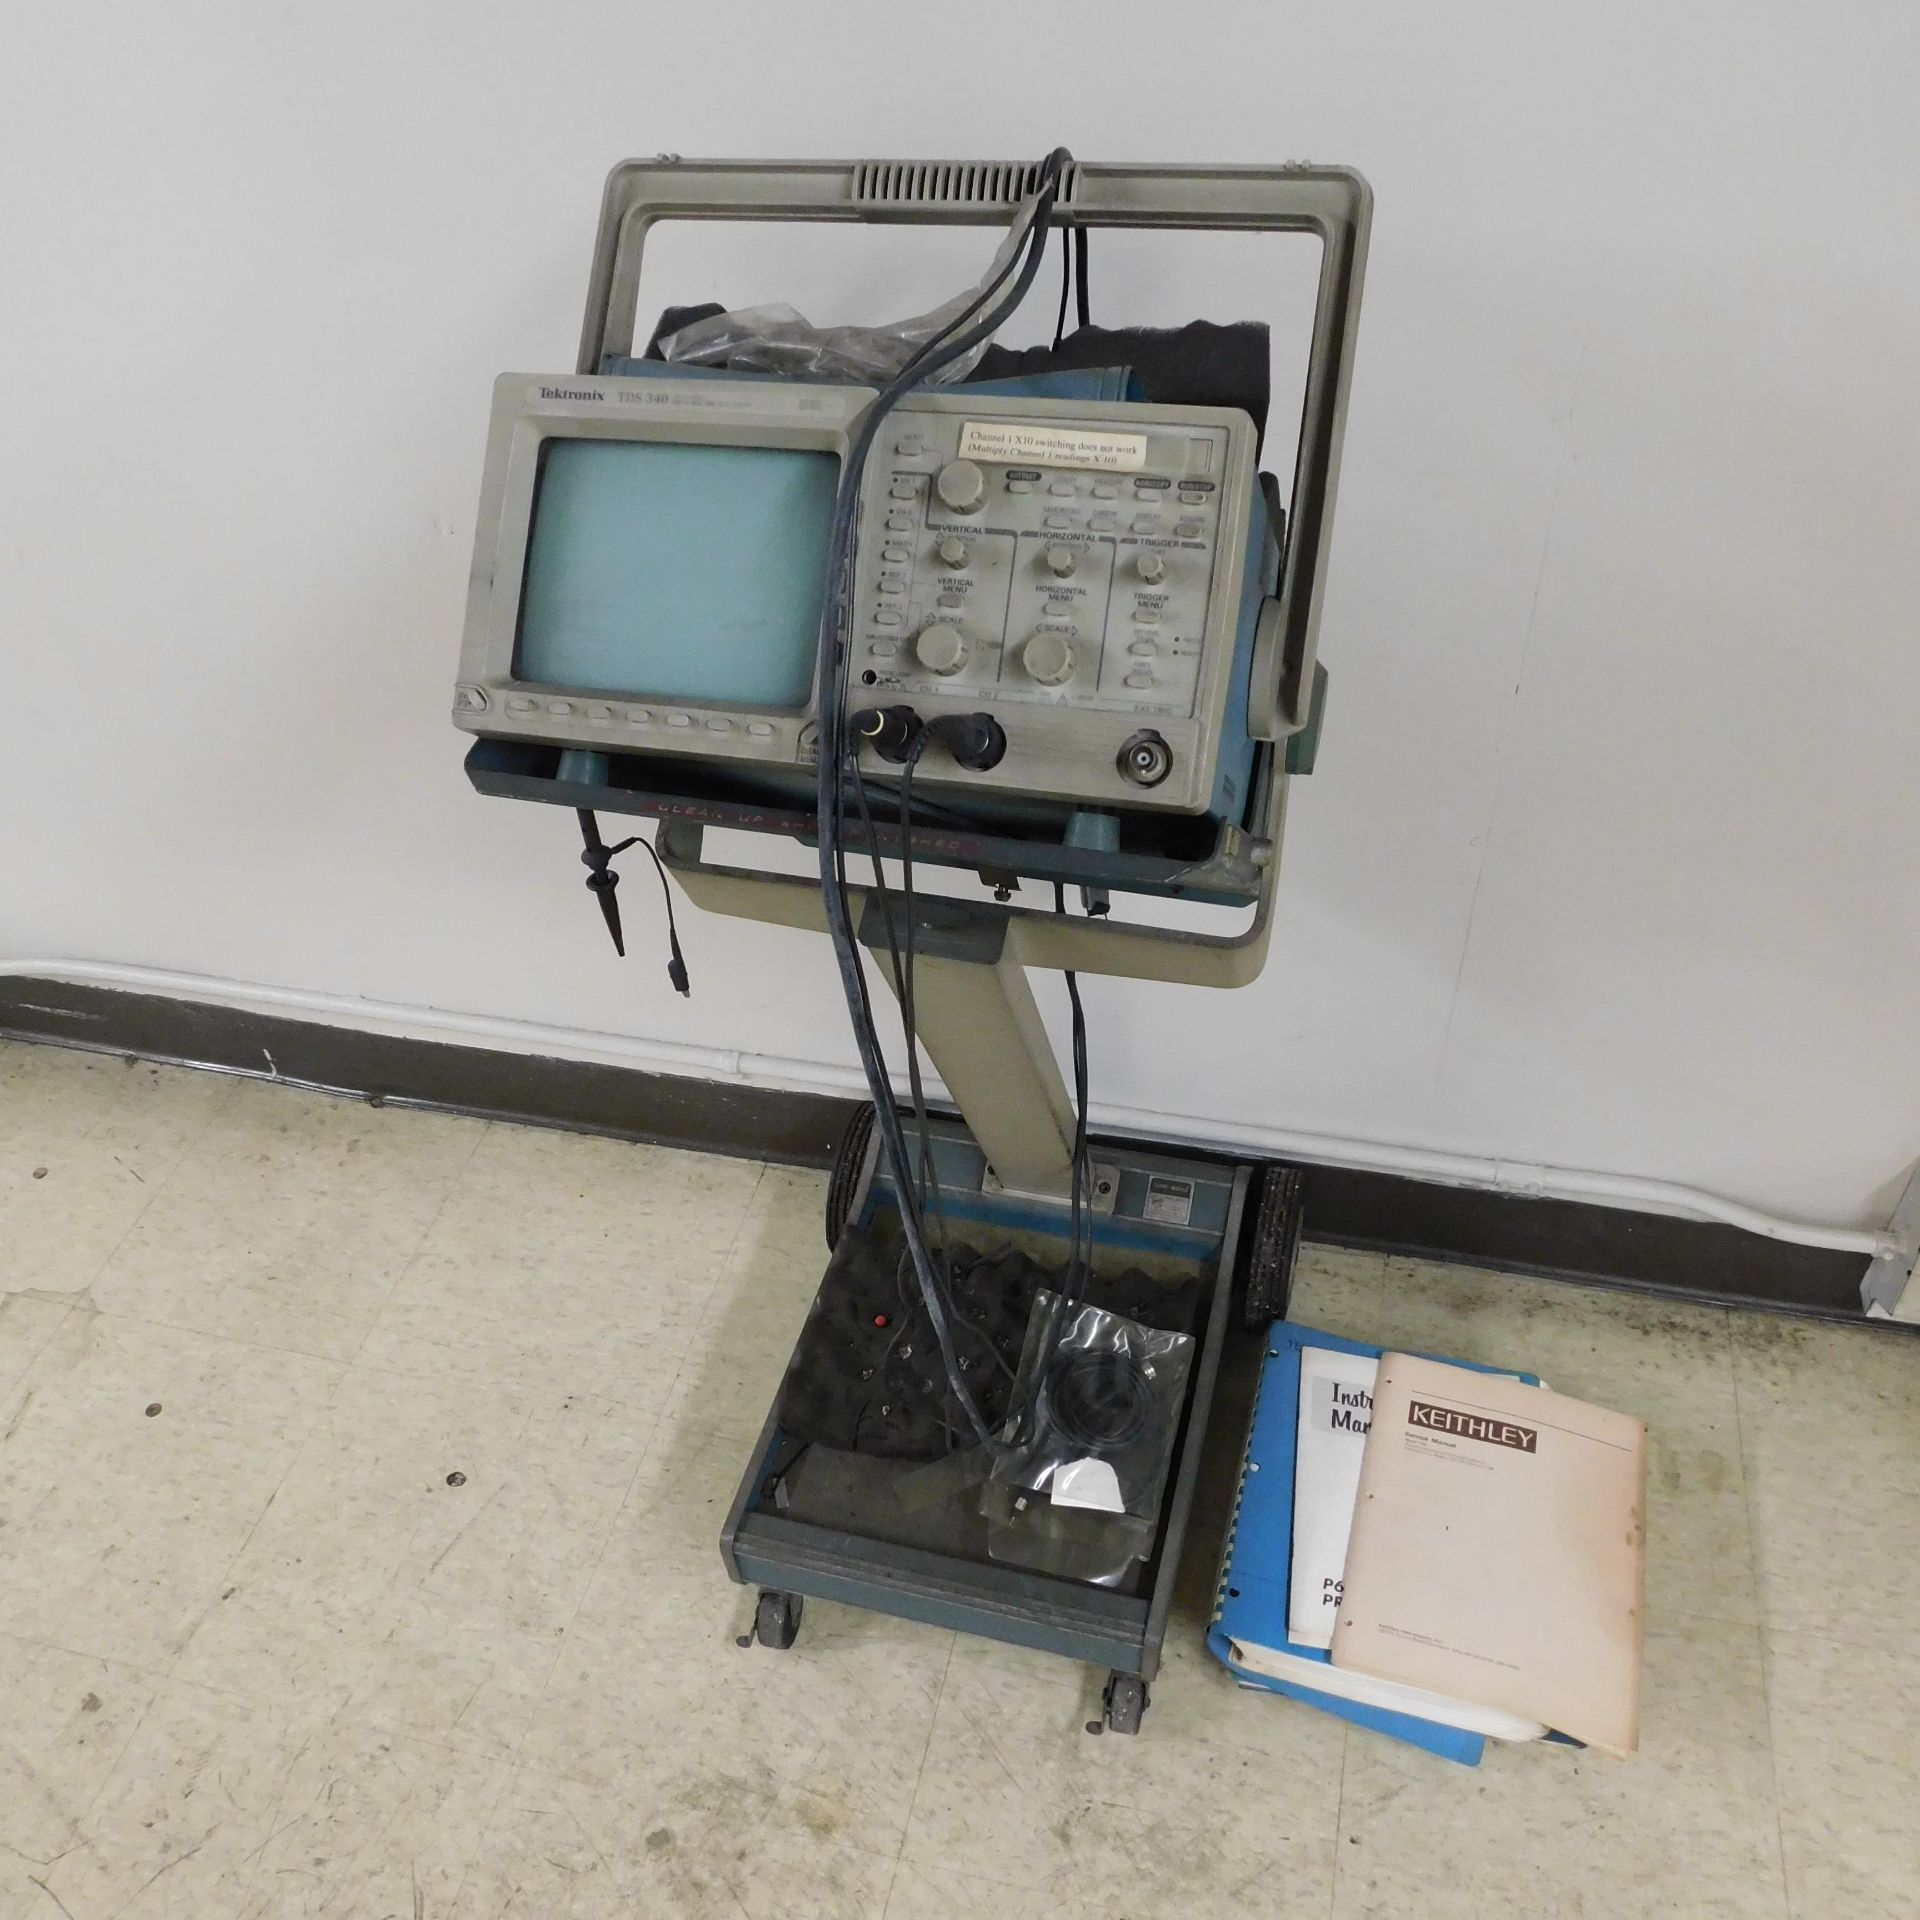 Tektronix TDS-340 2-Channel, Real Time Oscilloscope, Numerous Probes